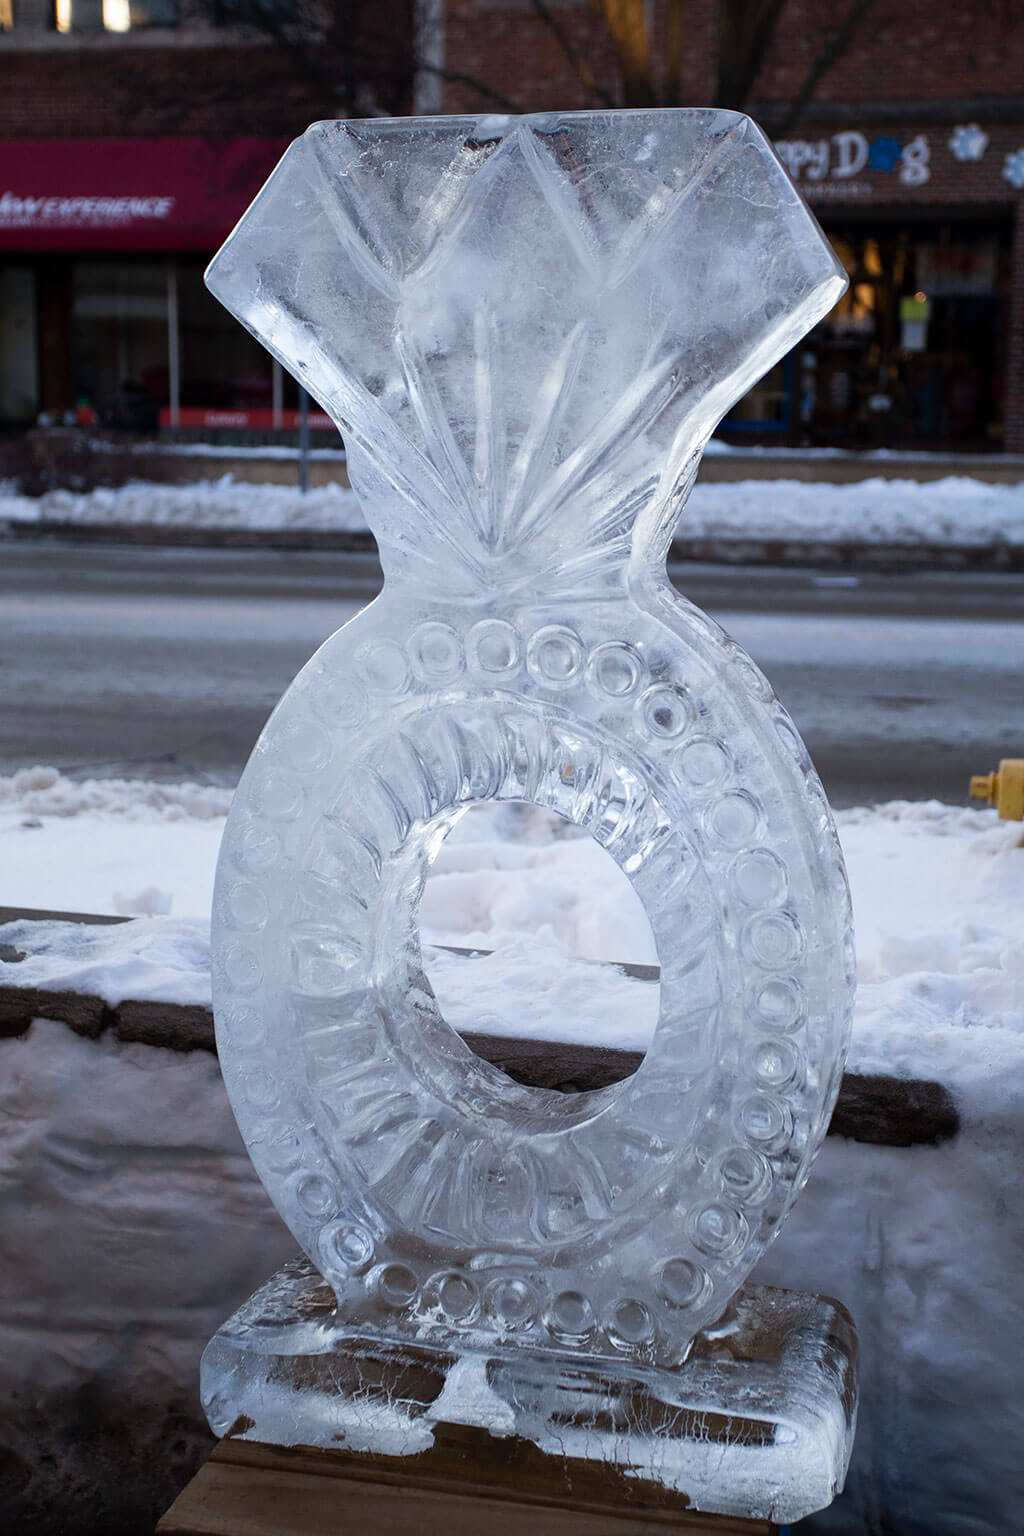 drive-swim-fly-downers-grove-chicago-illinois-ice-sculpture-downtown-businesses-diamond-ring